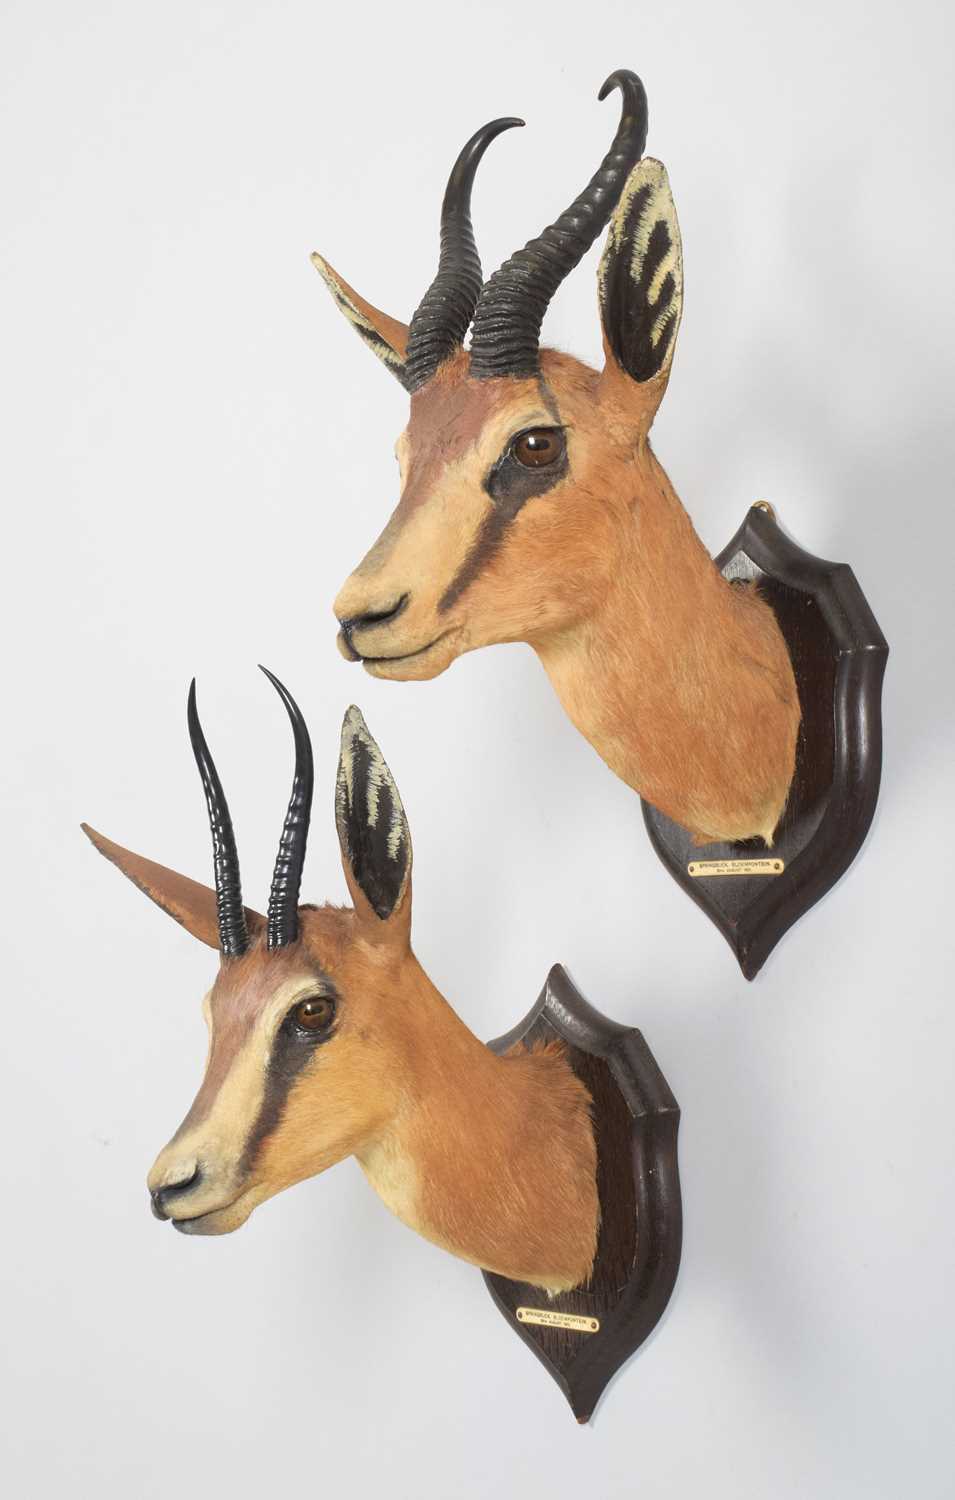 Taxidermy: A Pair of South African Springbok (Antidorcas marsupialis), dated August 29th-30th